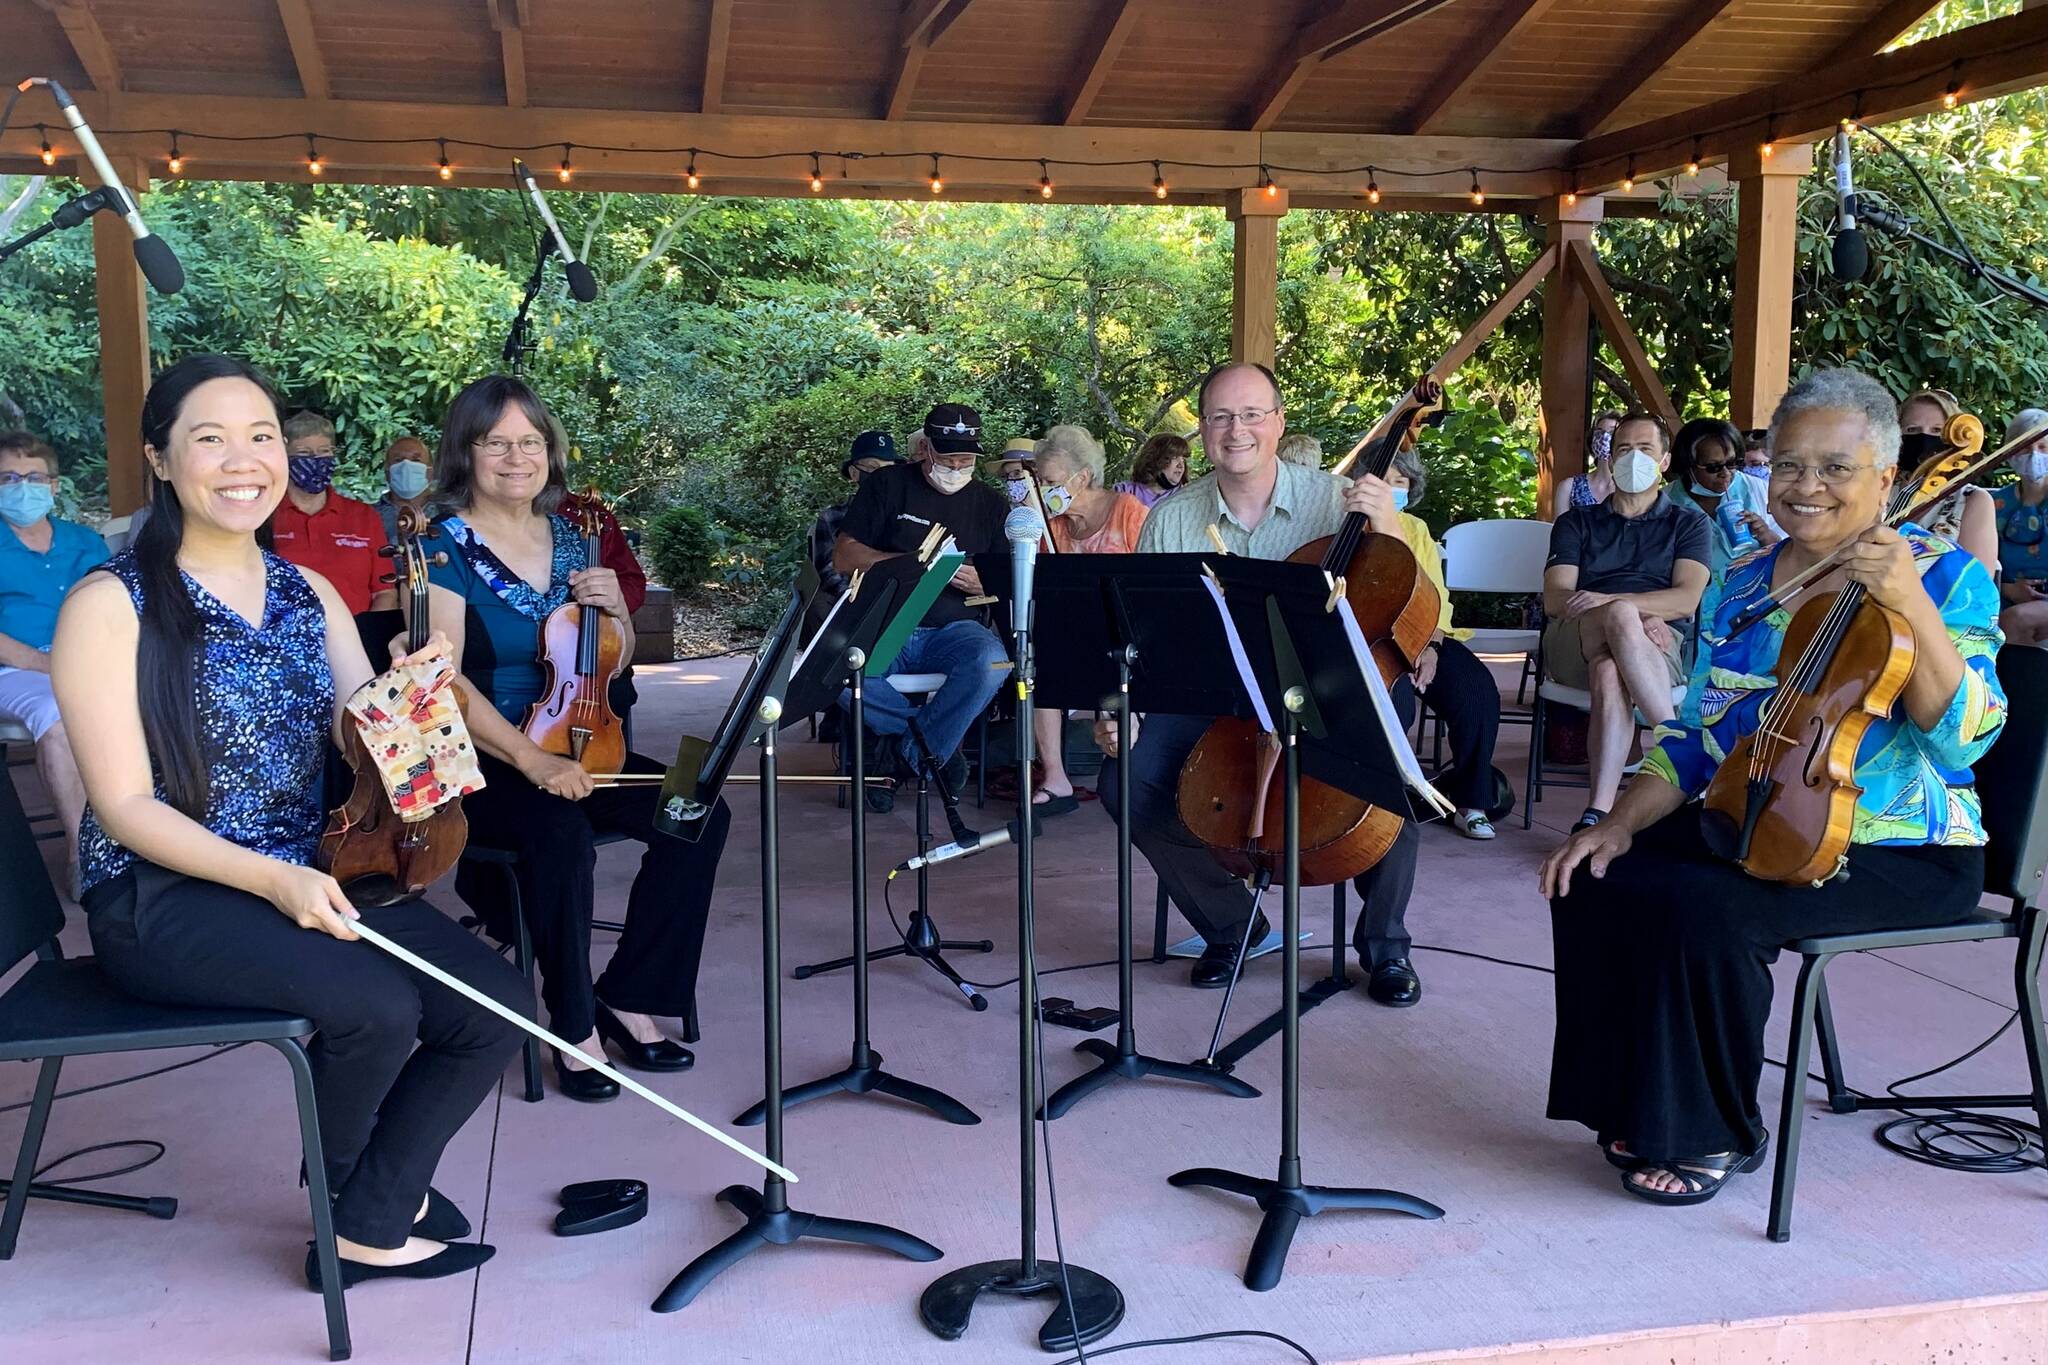 Photo courtesy of Auburn Symphony Orchestra
Auburn Symphony will perform two free concerts and one ticketed concert this summer. All three appearances will be casual, outdoor, family-friendly events.